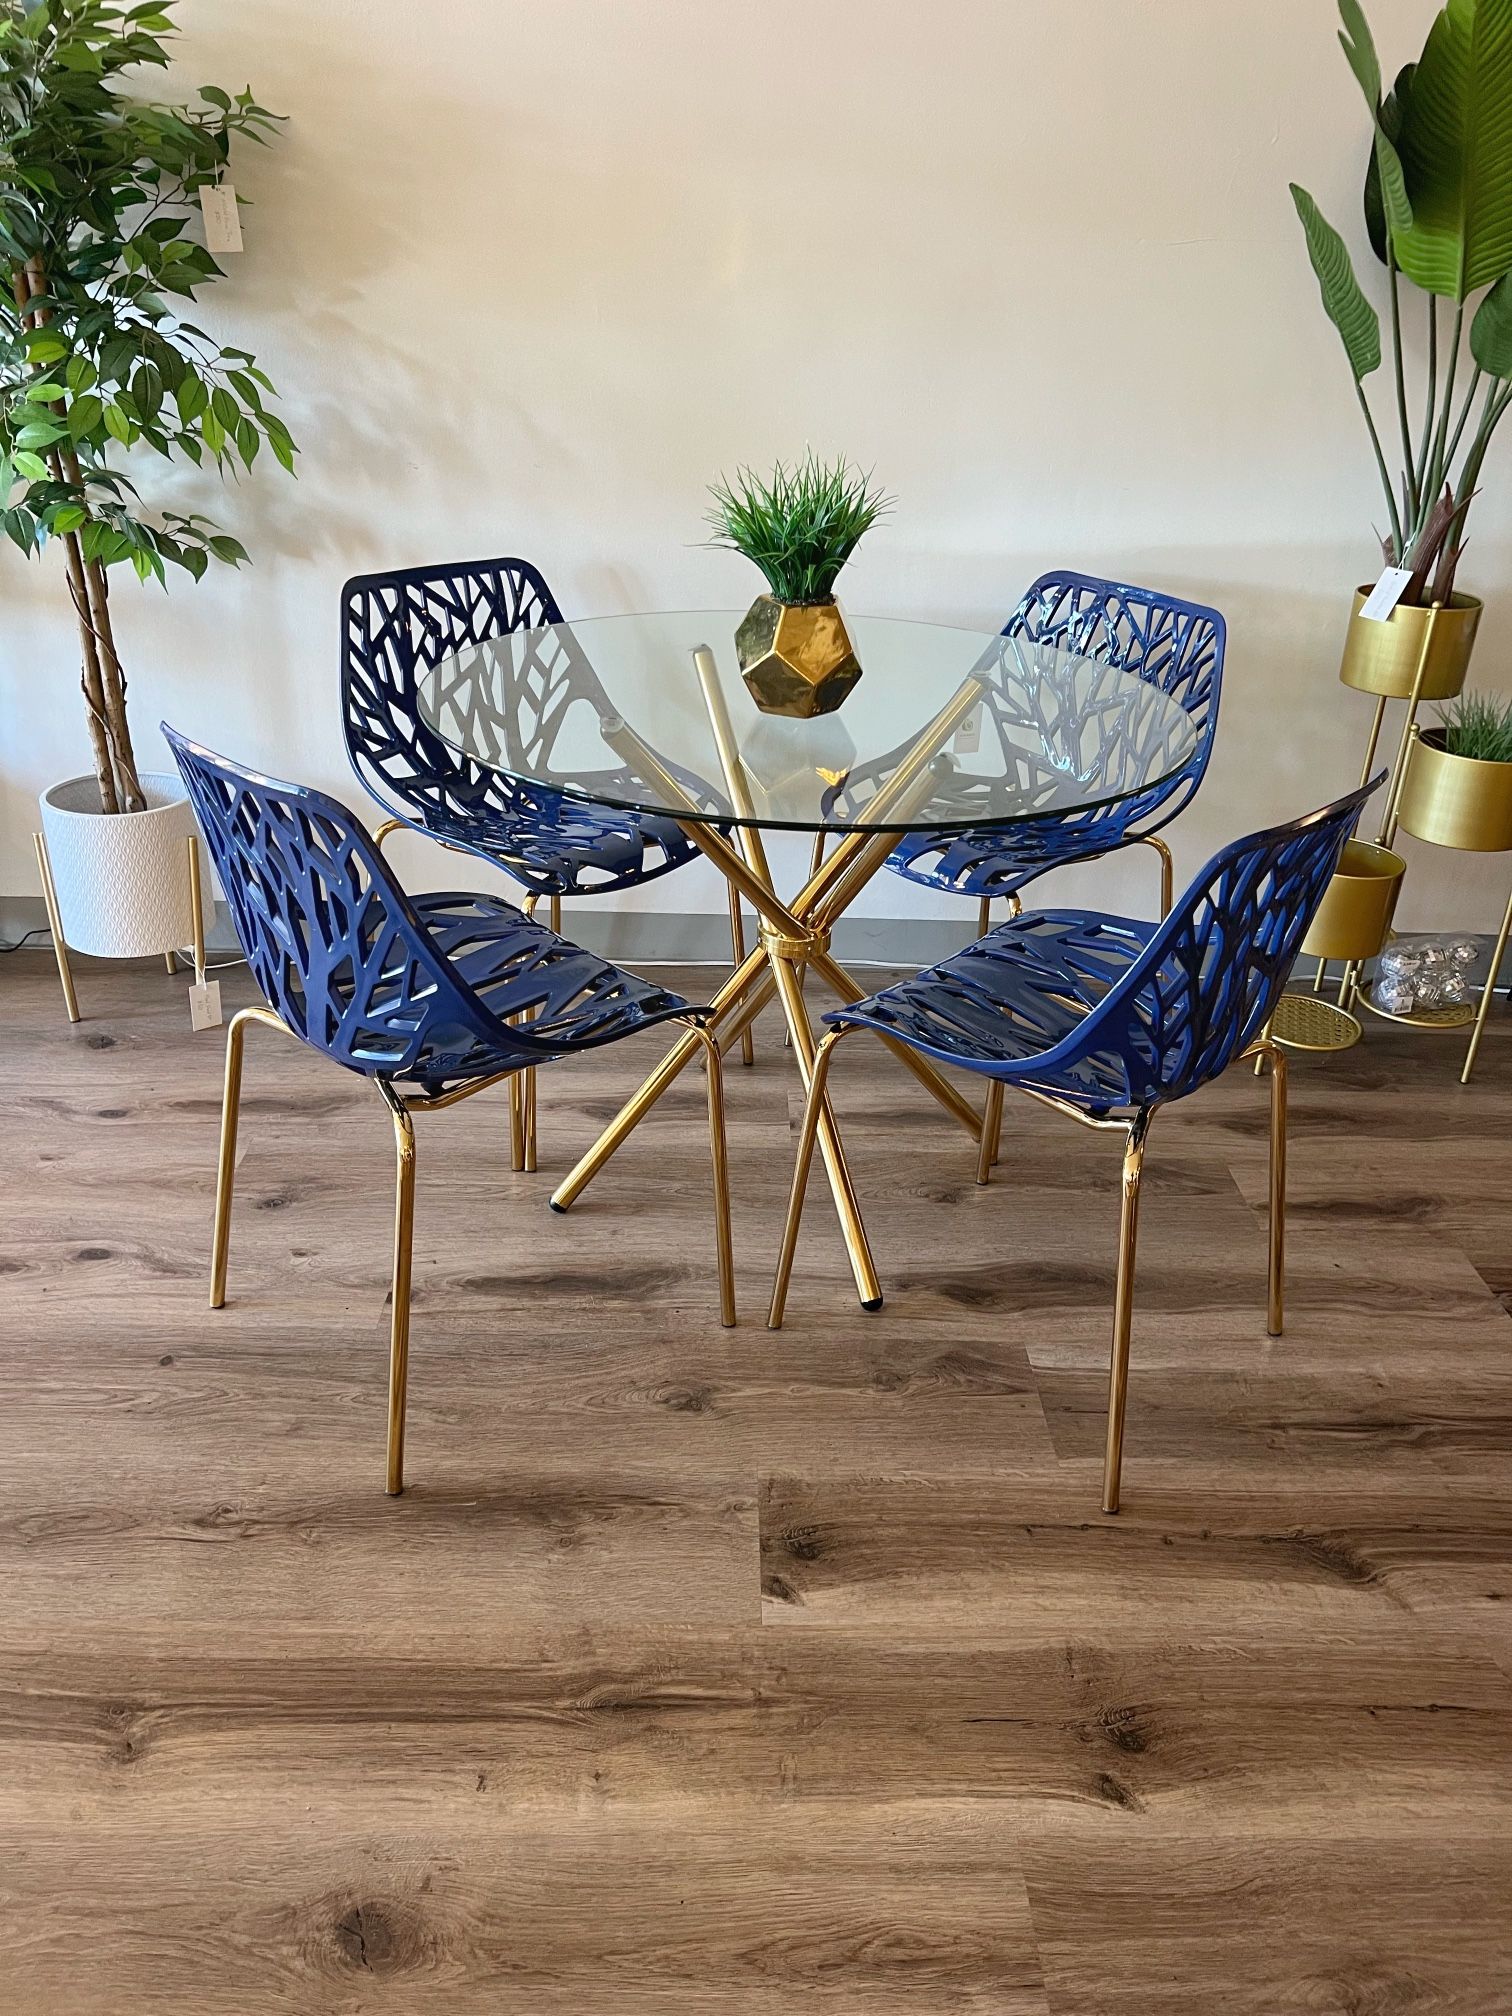 Navy Blue Kitchen Chairs And Table Set For 4